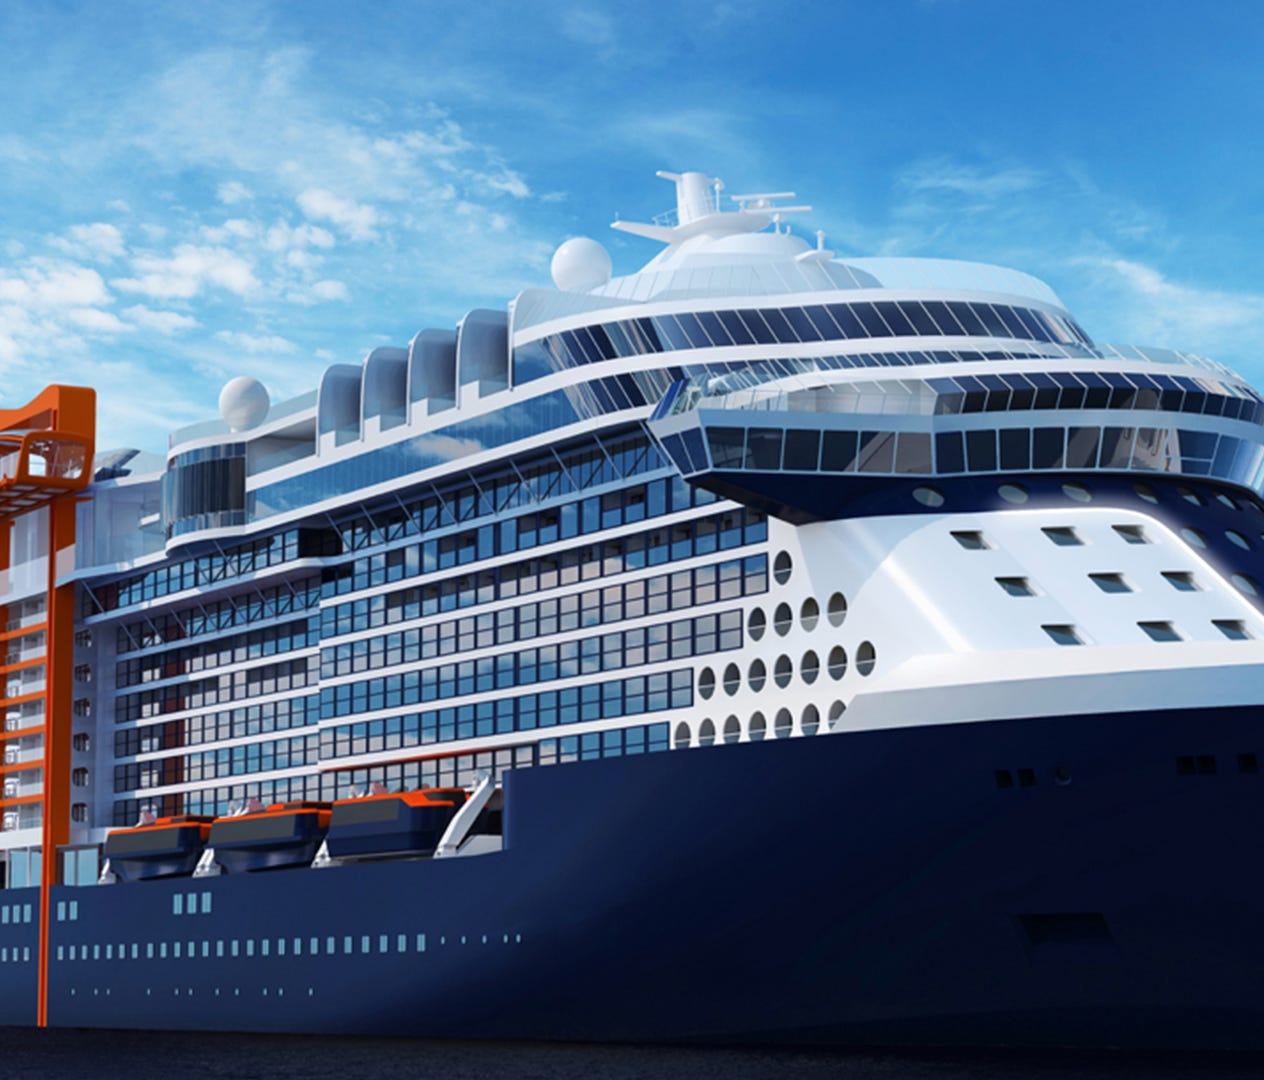 Celebrity Cruises will launch a new series of vessels in 2018 with the debut of Celebrity Edge, a 117,000-ton ship that will hold 2,900 people at double occupancy.